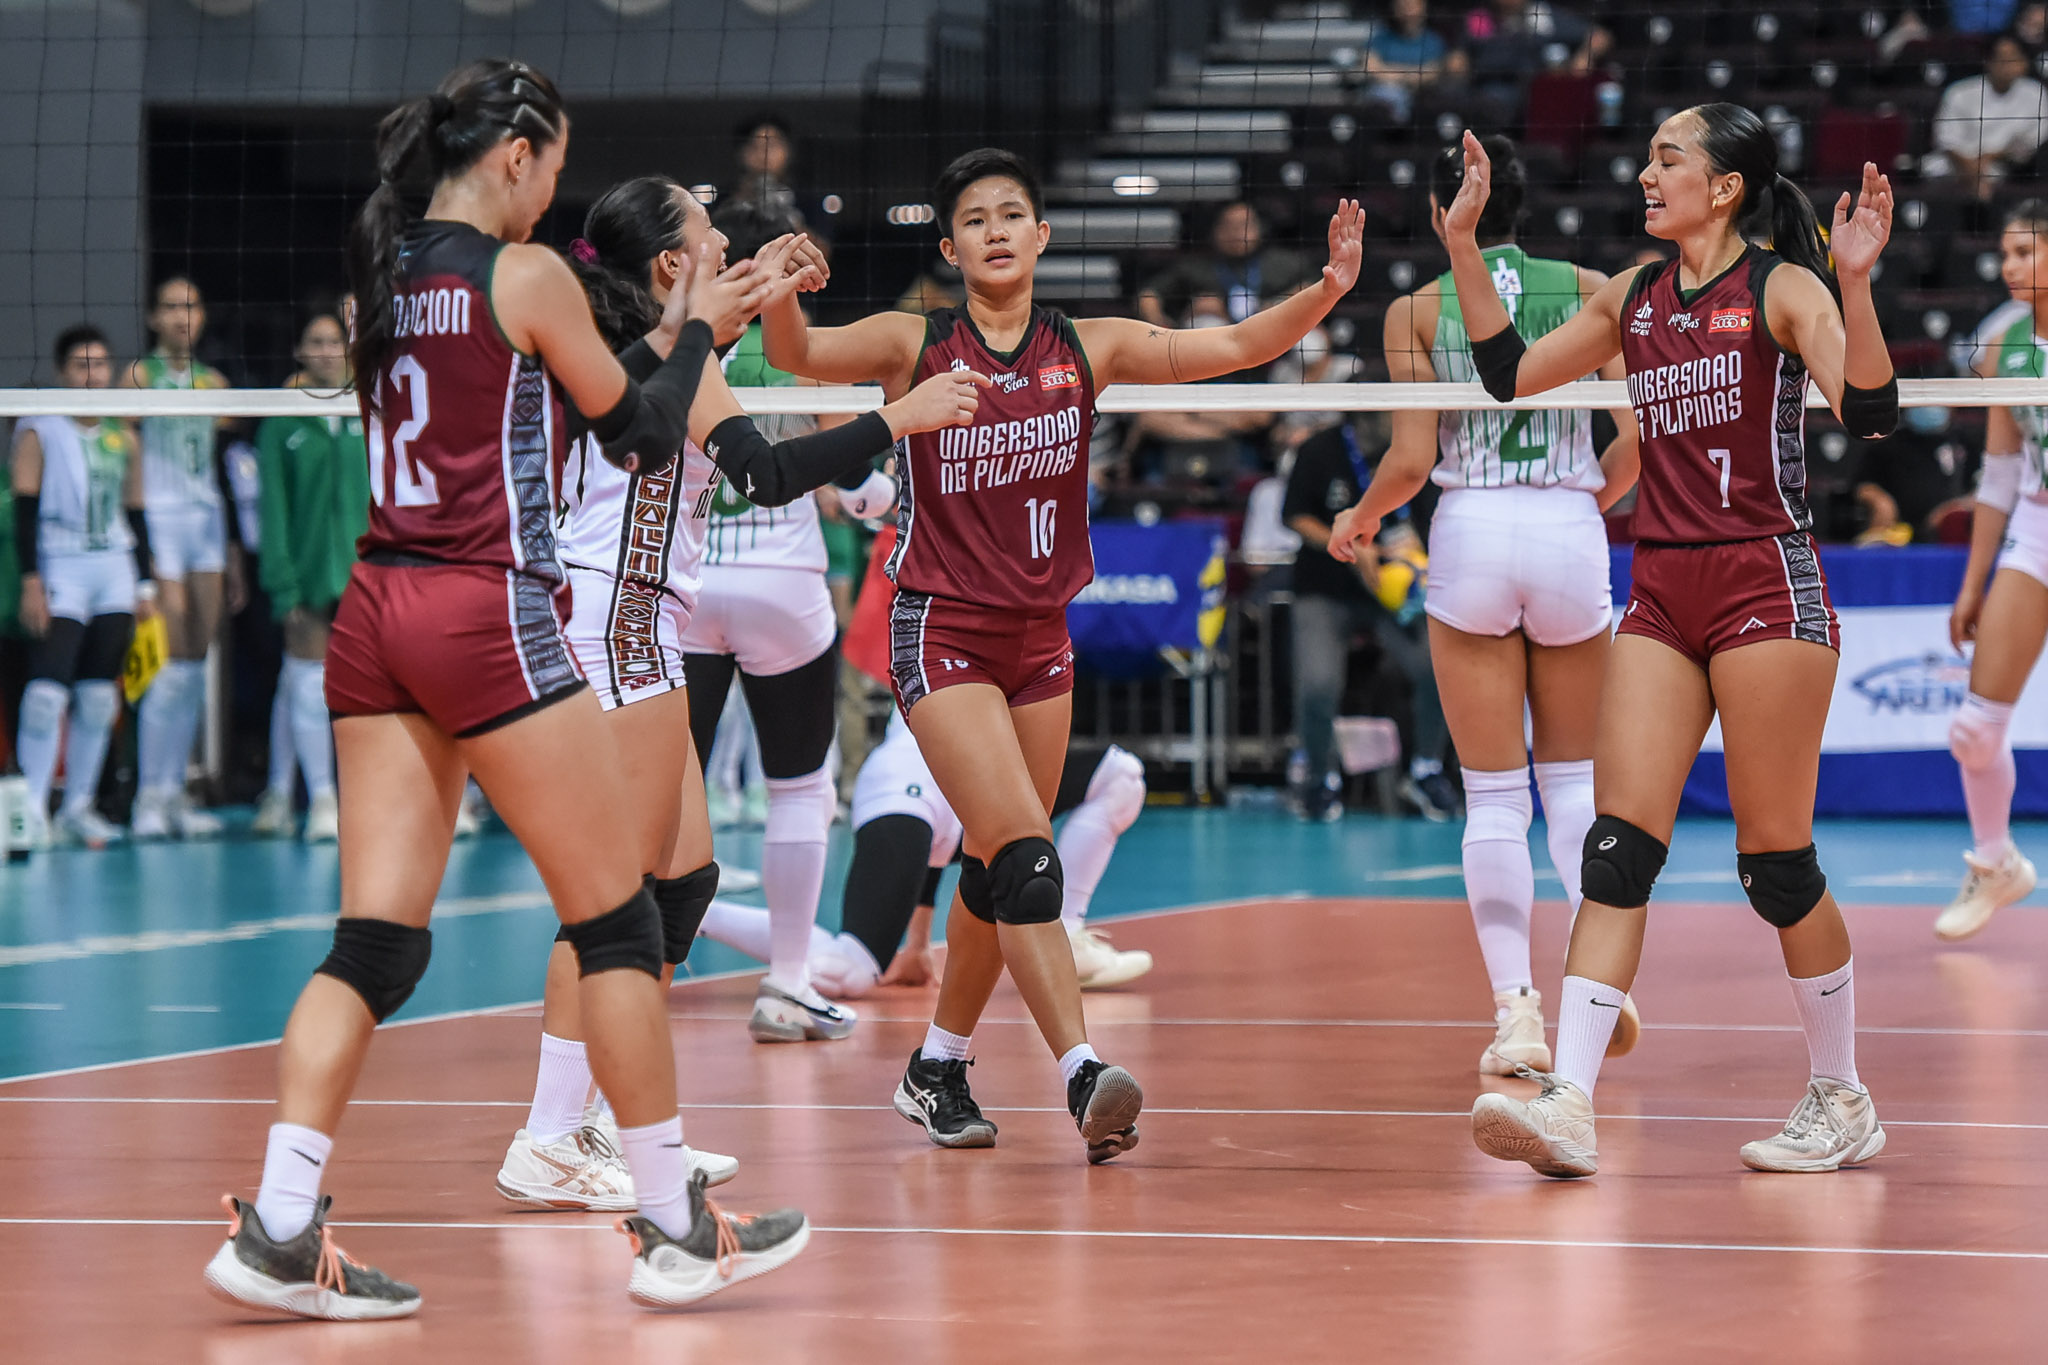 UAAP-85-WVB-DLSU-vs.-UP-Alyssa-Bertolano-1536 Shaq delos Santos declines comment on UP WVT issues News PVL UAAP UP Volleyball  - philippine sports news